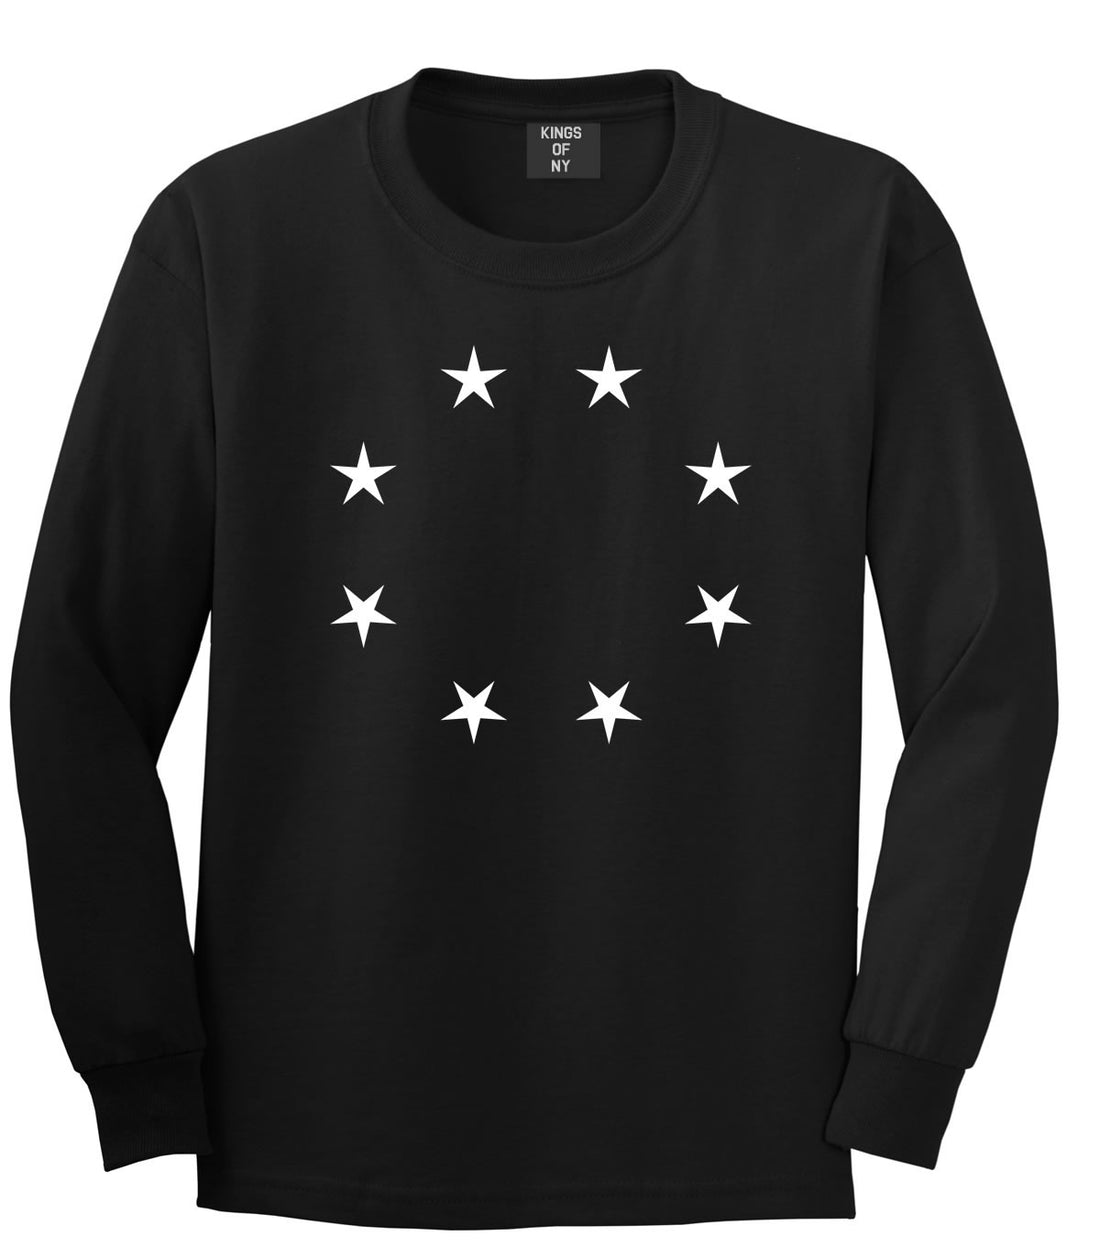 Stars Circle Scale Black by Kings Of NY True Goth Ghetto Long Sleeve Boys Kids T-Shirt In Black by Kings Of NY